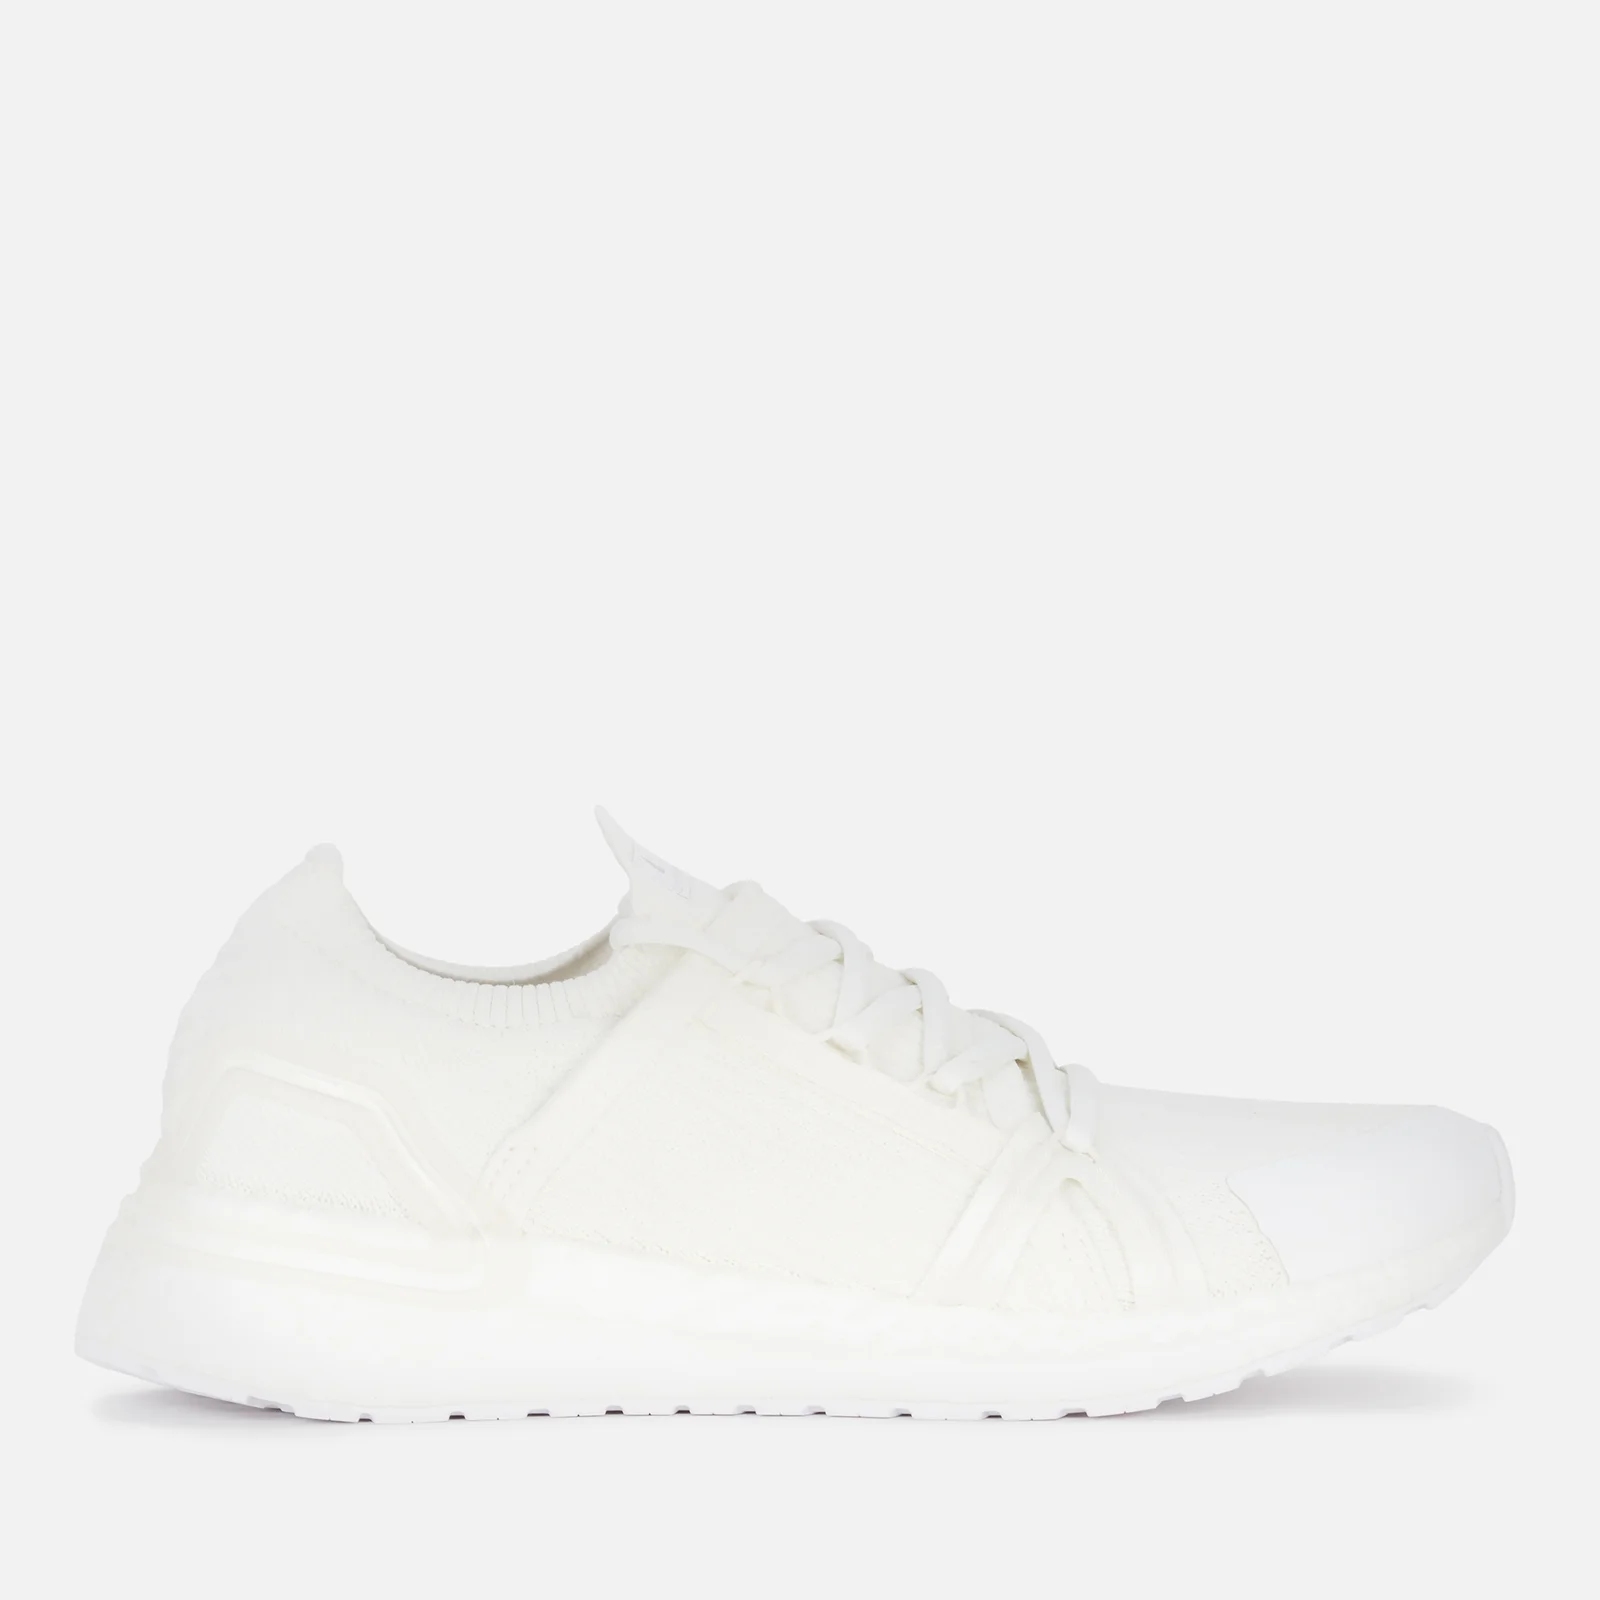 adidas by Stella McCartney Women's Asmc Ultraboost 20 No Dye Trainers - Supcol/Supcol/Supcol Image 1